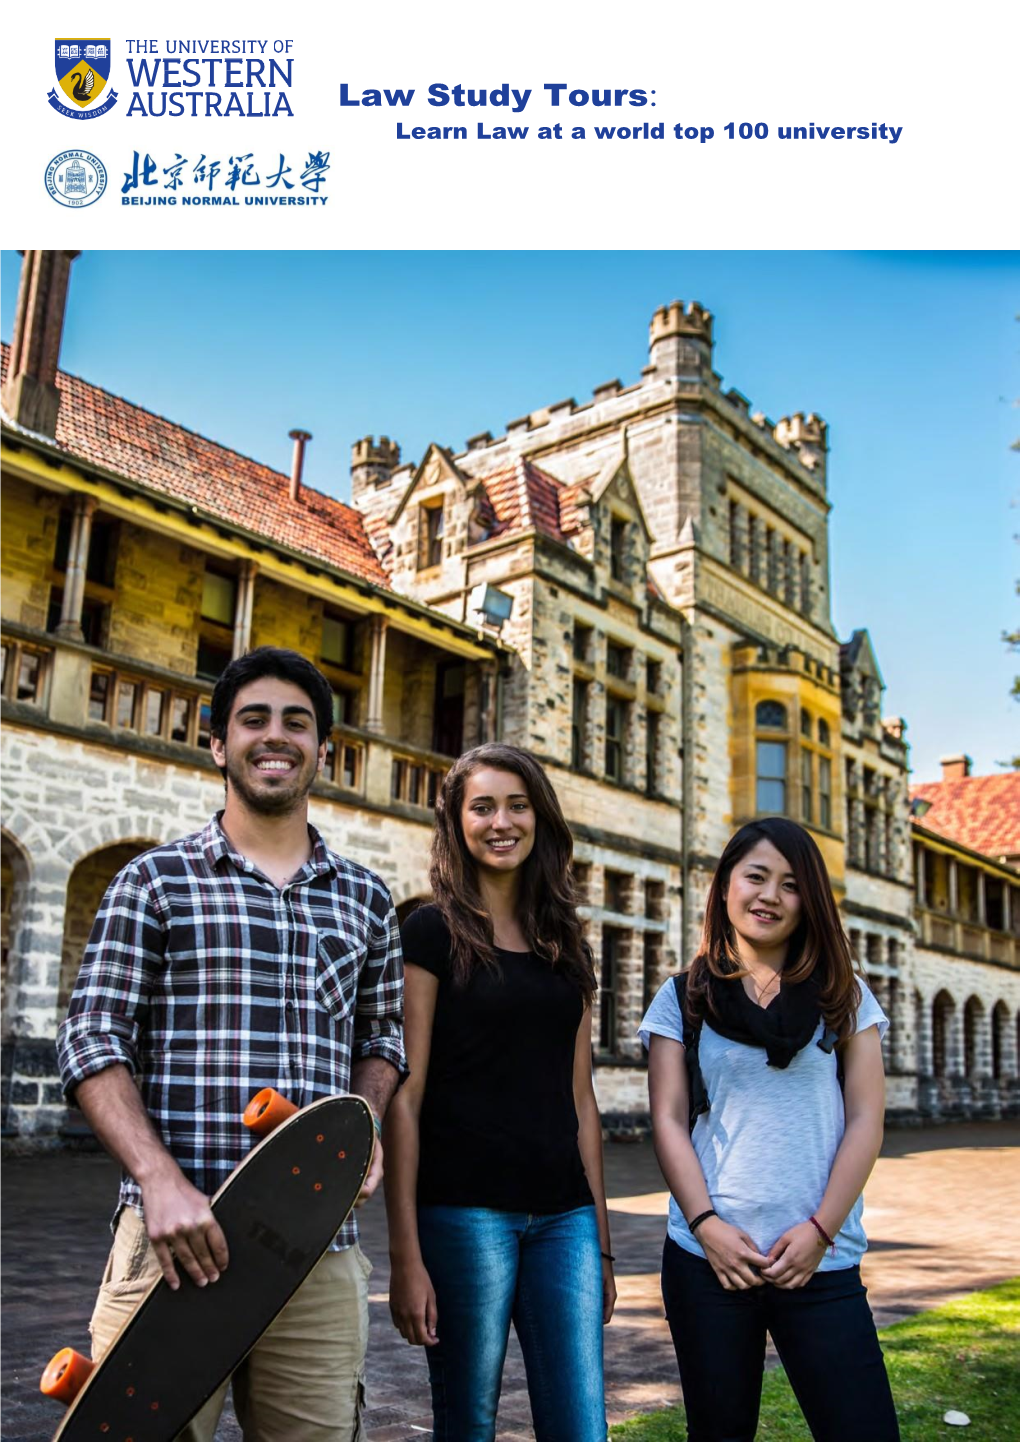 Law Study Tours: Learn Law at a World Top 100 University